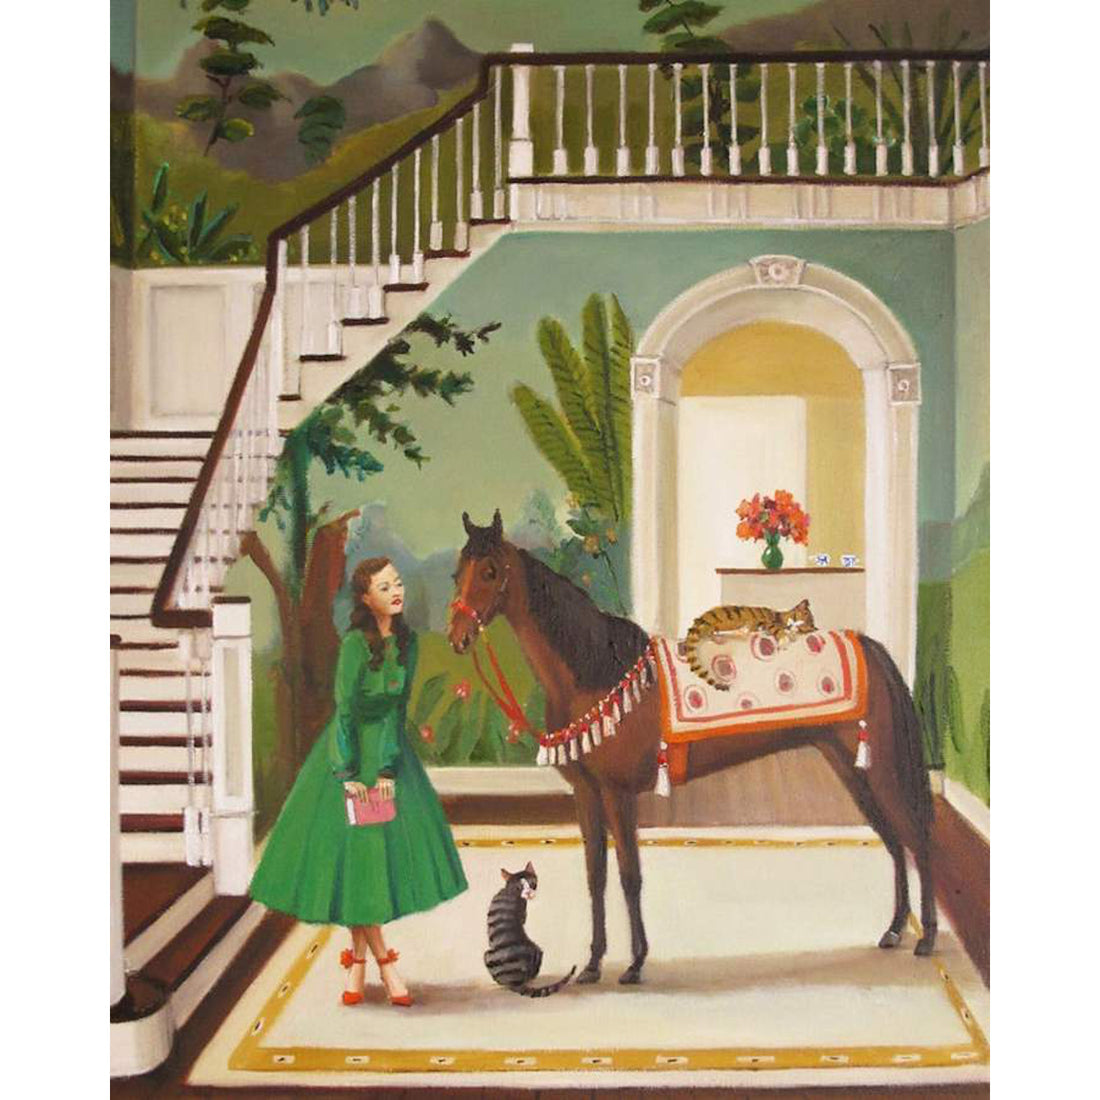 A painterly illustrated scene inside the mural-painted foyer of a home, where a woman in a green dress stands with a brown horse and two cats.